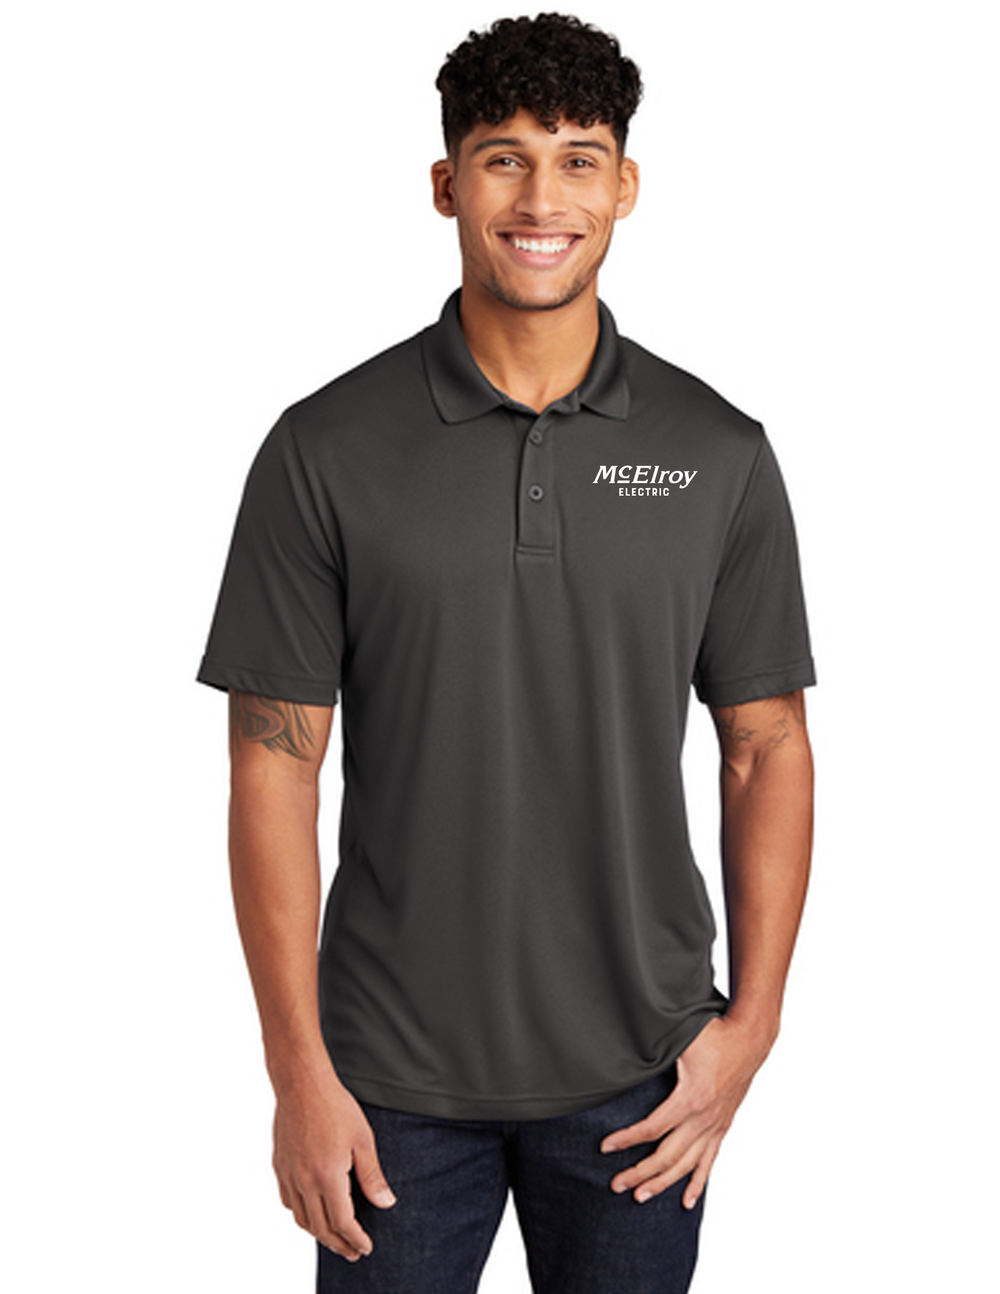 McElroy Electric - Sport-Tek PosiCharge Competitor Polo - ST550